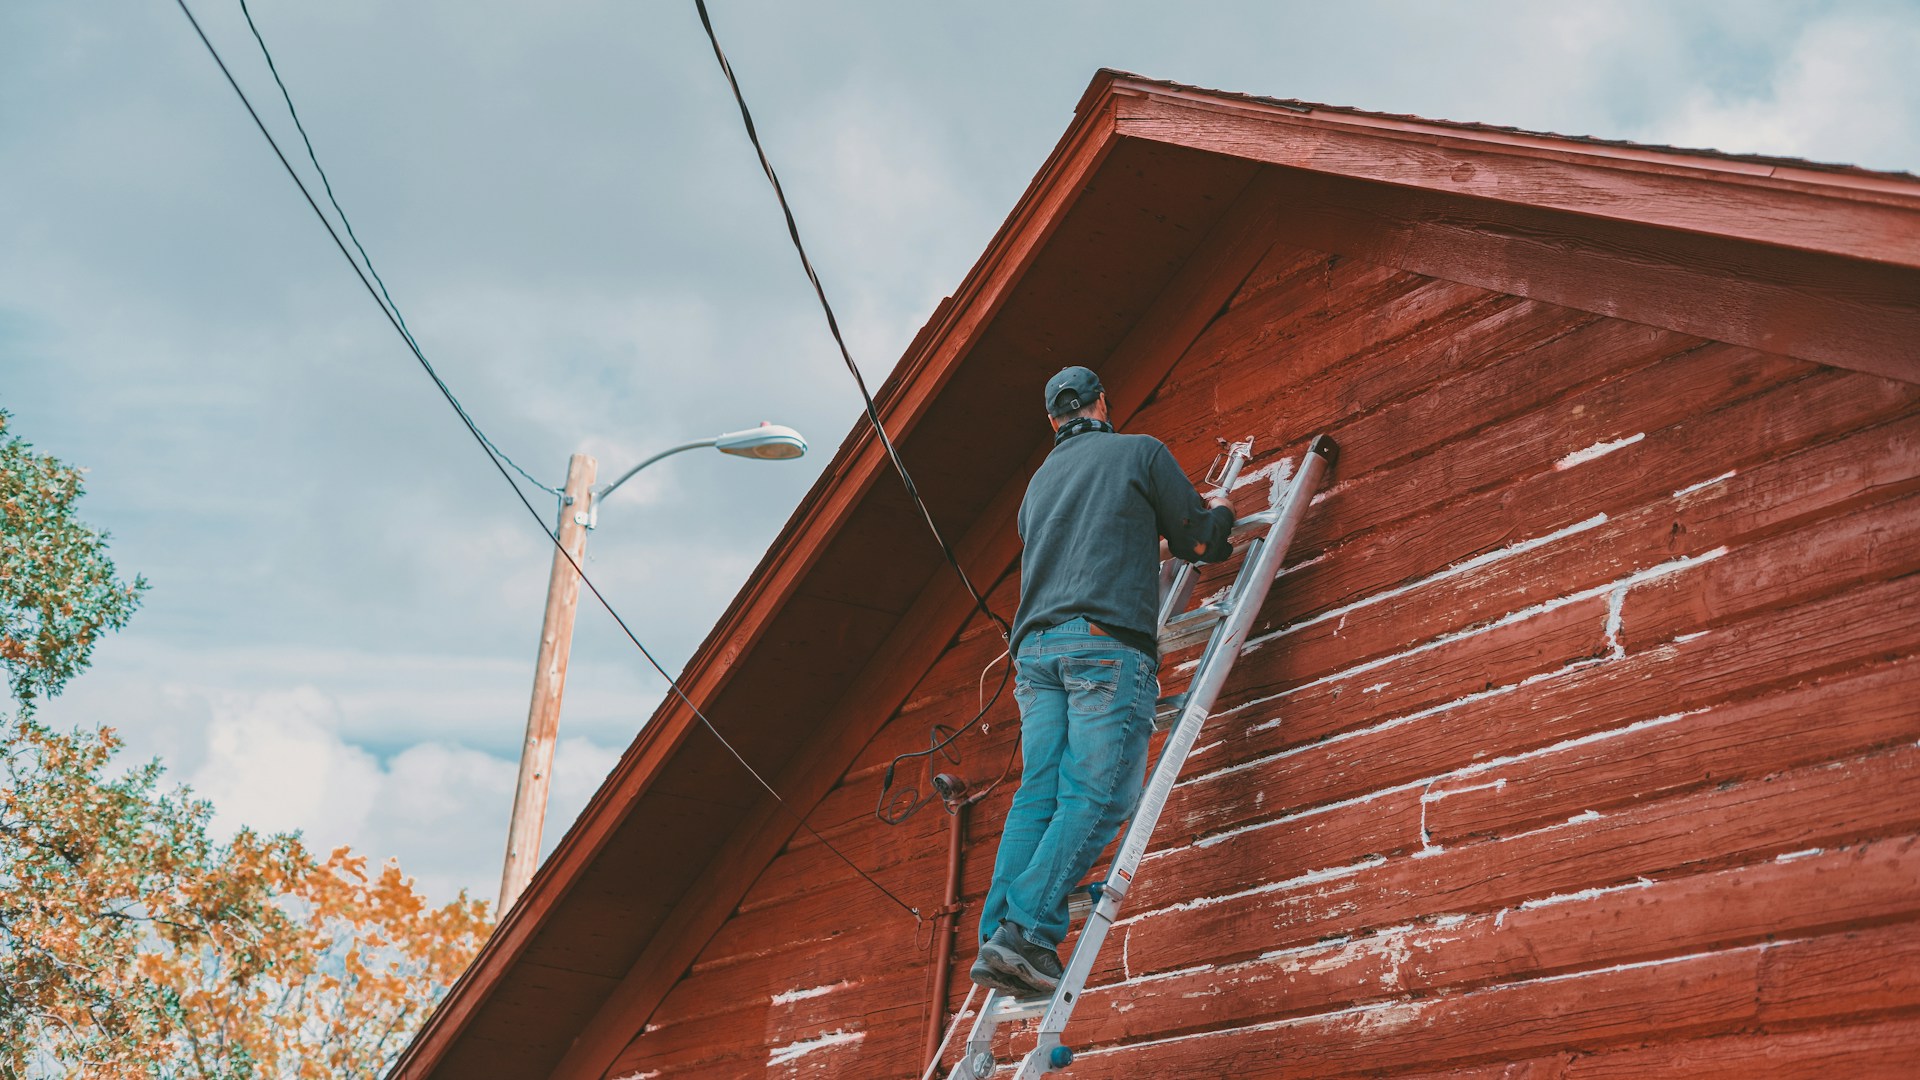 A person on a ladder painting the side of a building red. Image by Unsplash